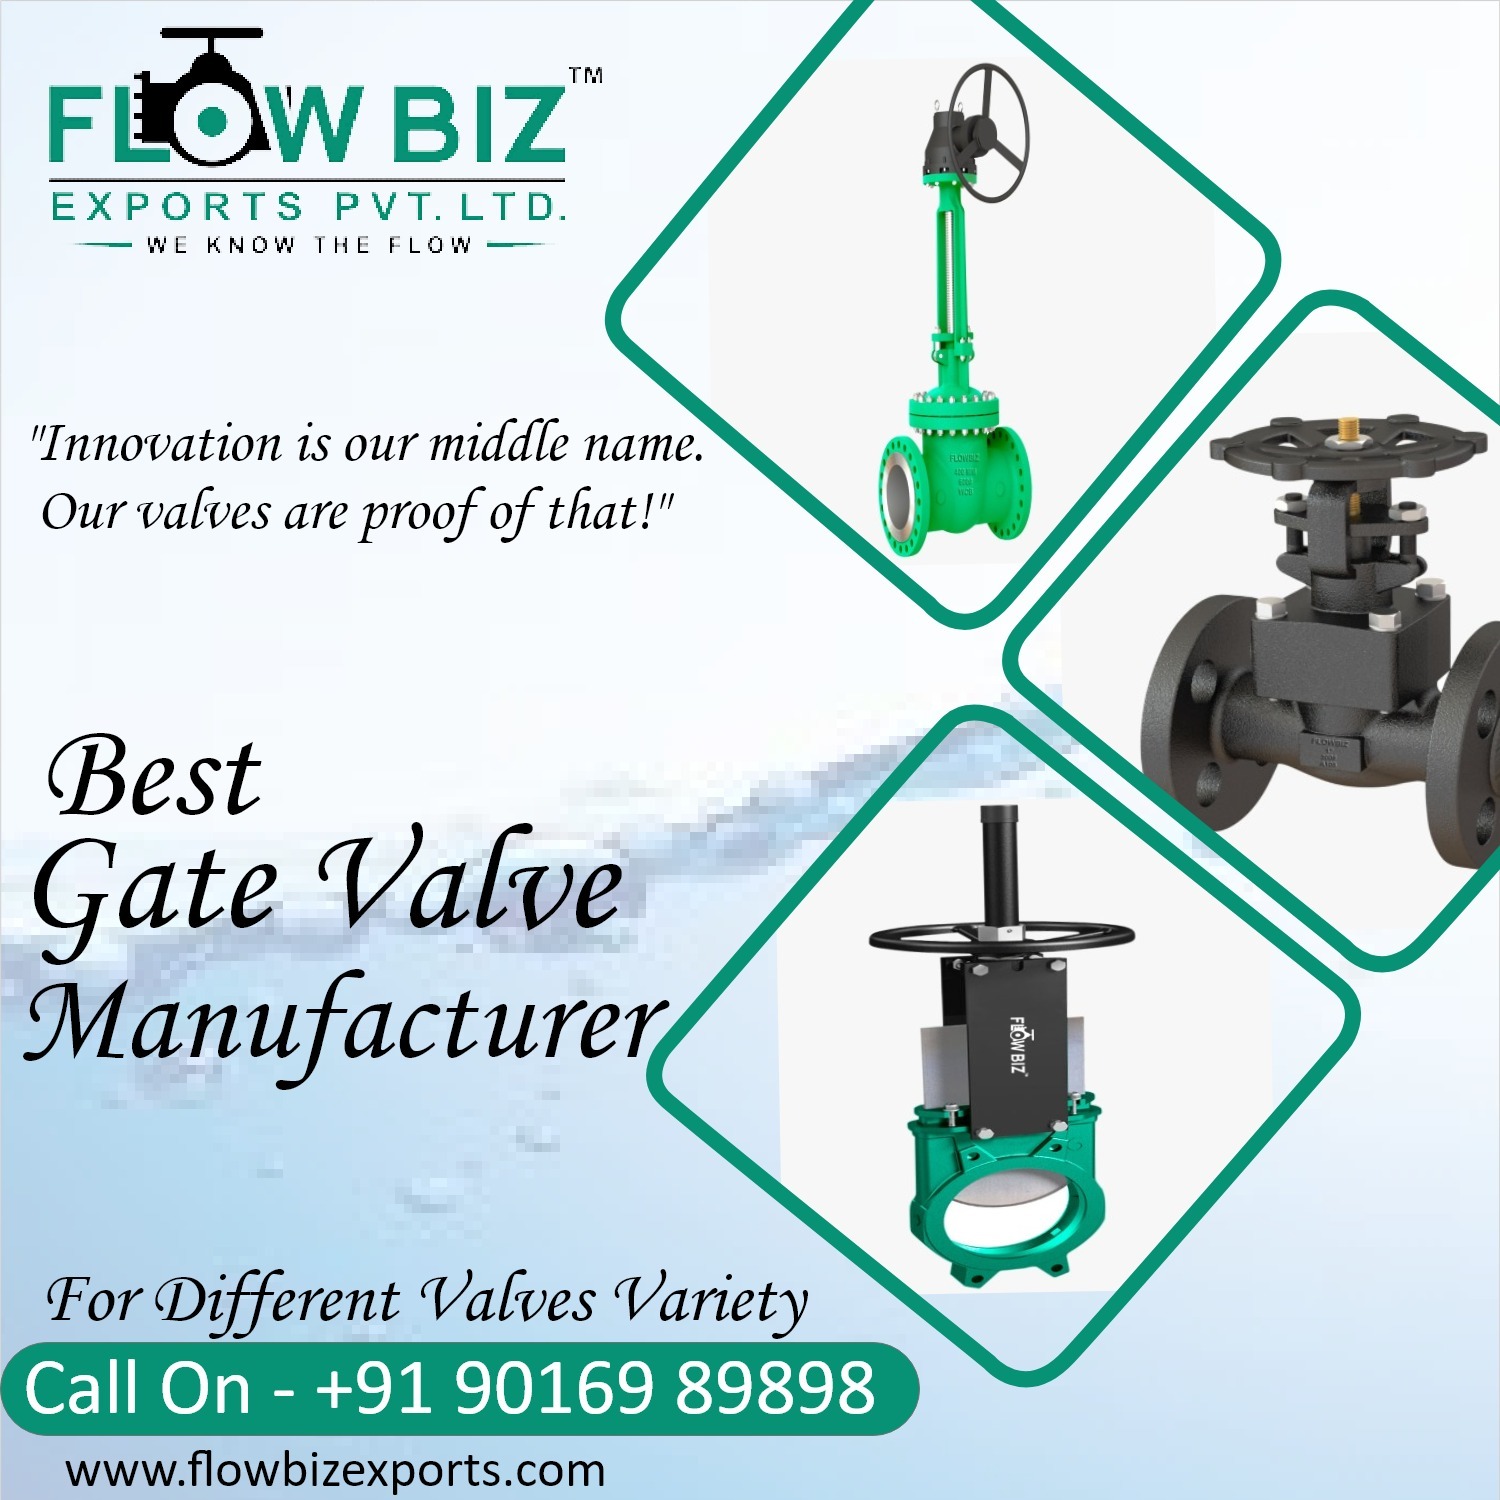 Innovation is our middle name. Our valves are proof of that!" Best Gate Valve Manufacturer.